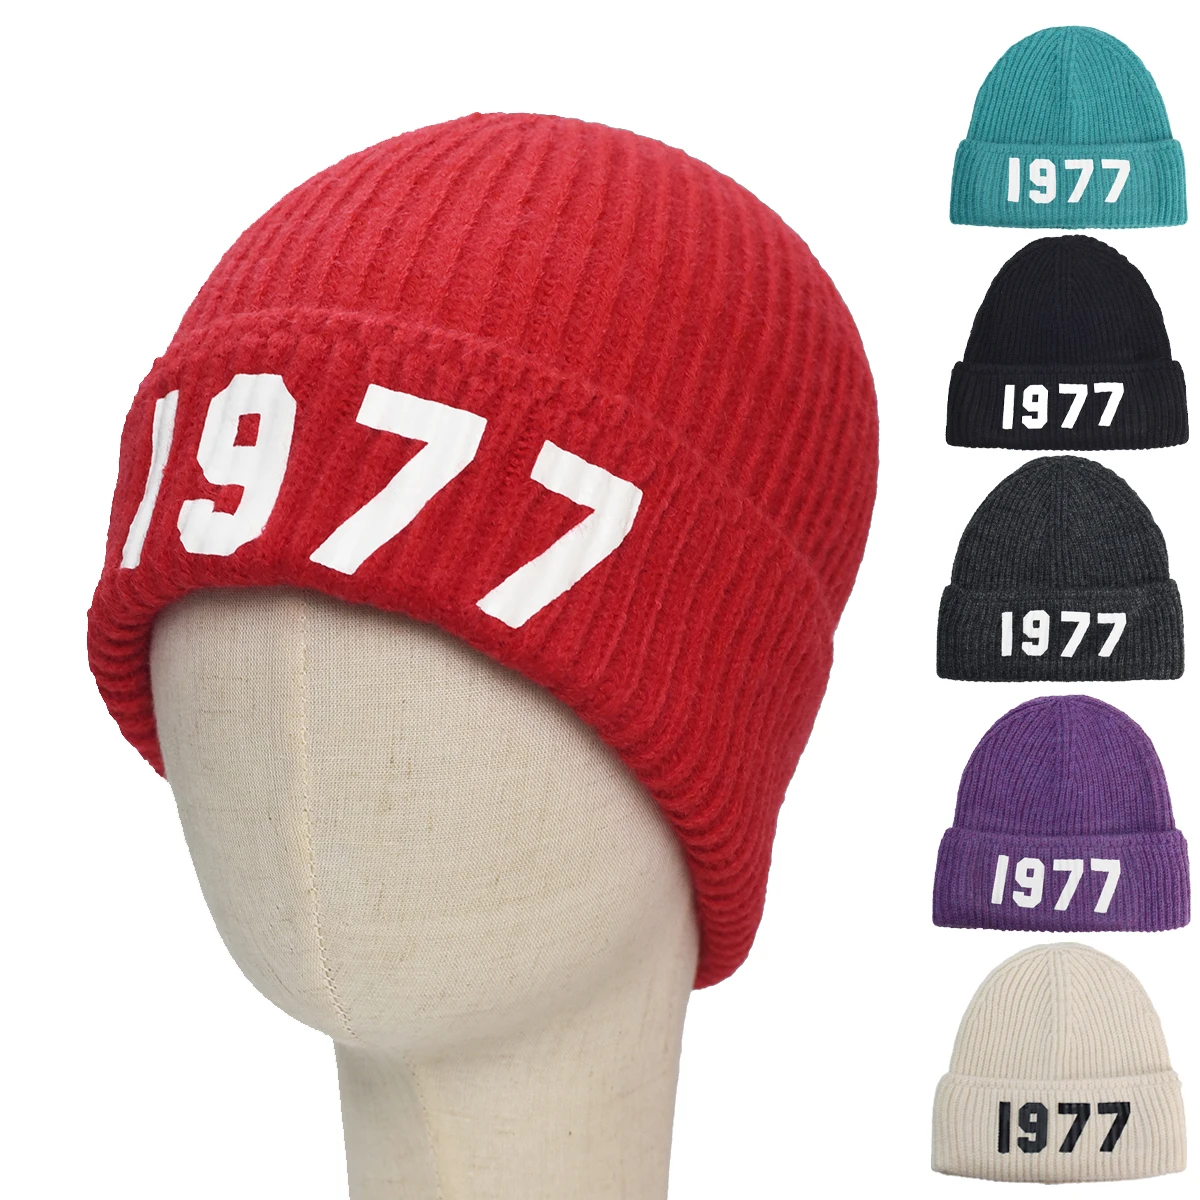 

New Fashion Womens Mens Beanie Hat 1977 Embroidered Outdoor Woman Beanies Bonnet Man Winter Autumn Knitted Skull Cap Fitted Hats